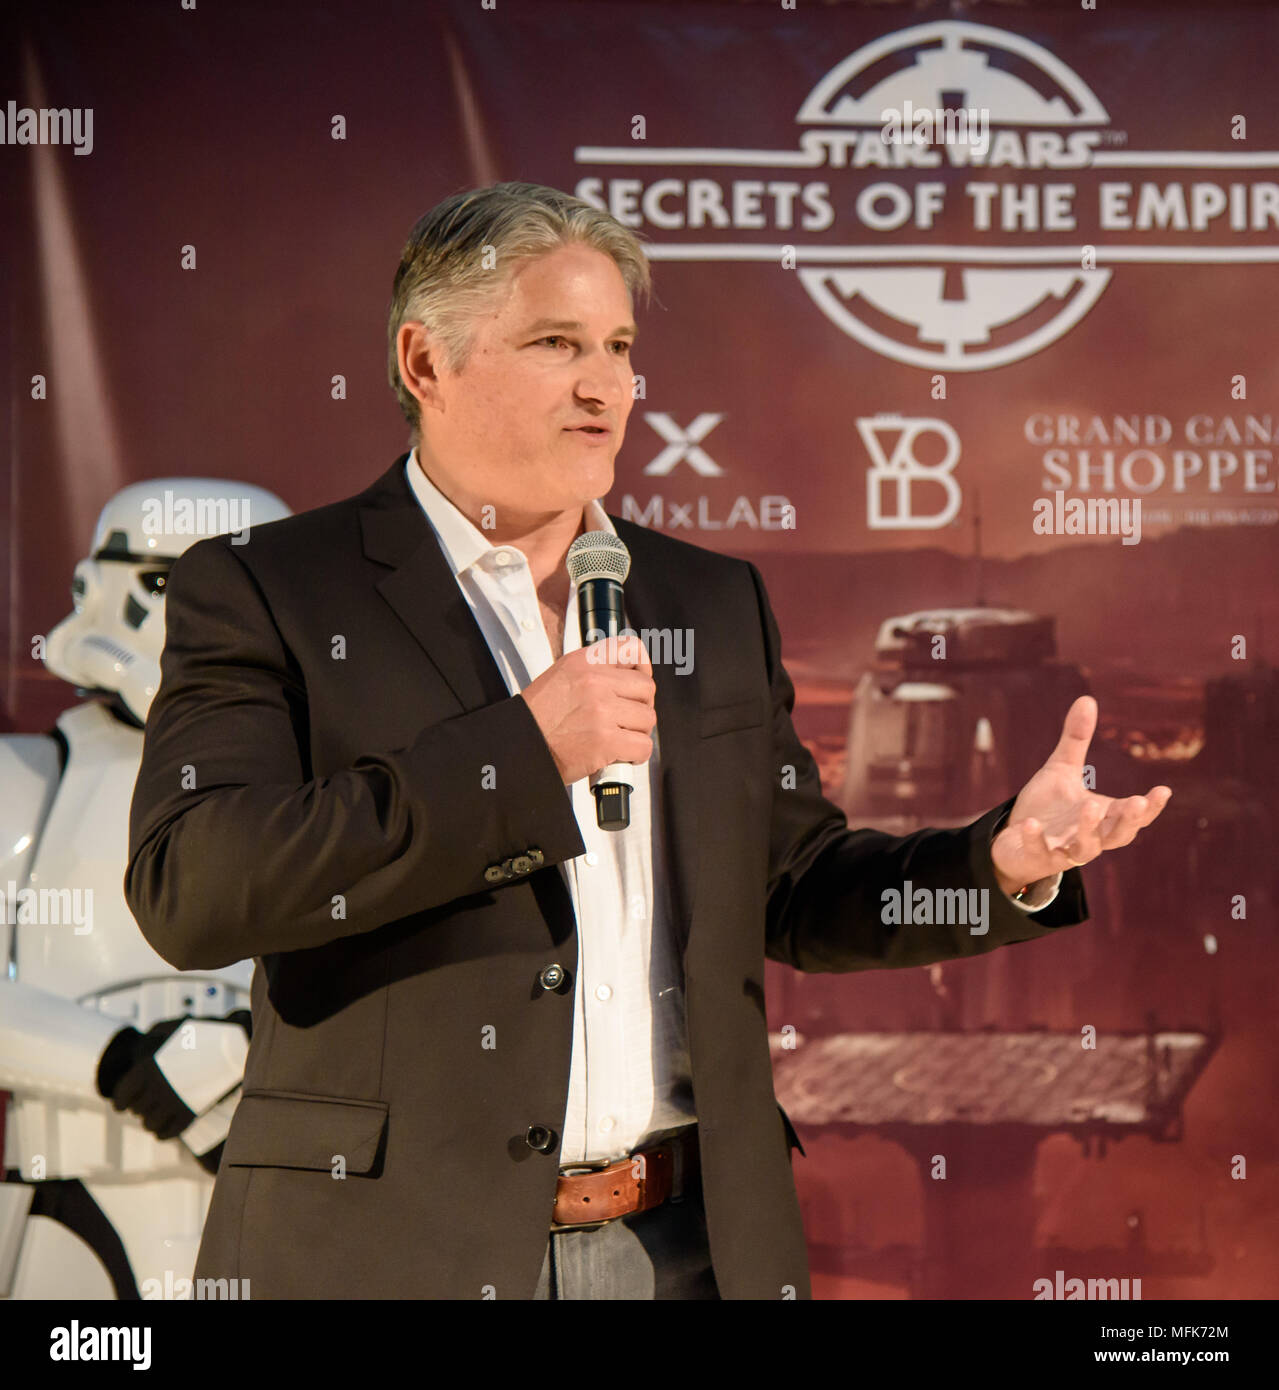 Las Vegas, NV, USA. 24th Apr, 2018. ***HOUSE COVERAGE*** Cliff Plumer (Chief Executive Officer) pictured as The VOID, ILMxLAB and GGP, Inc. celebrates the grand opening of Star Wars : Secrets of the Empire at the Grand Canal Shoppes in The Venetian and The Palazzo Las Vegas in Las vegas, NV on April 24, 2018. Credit: Gdp Photos/Media Punch/Alamy Live News Stock Photo